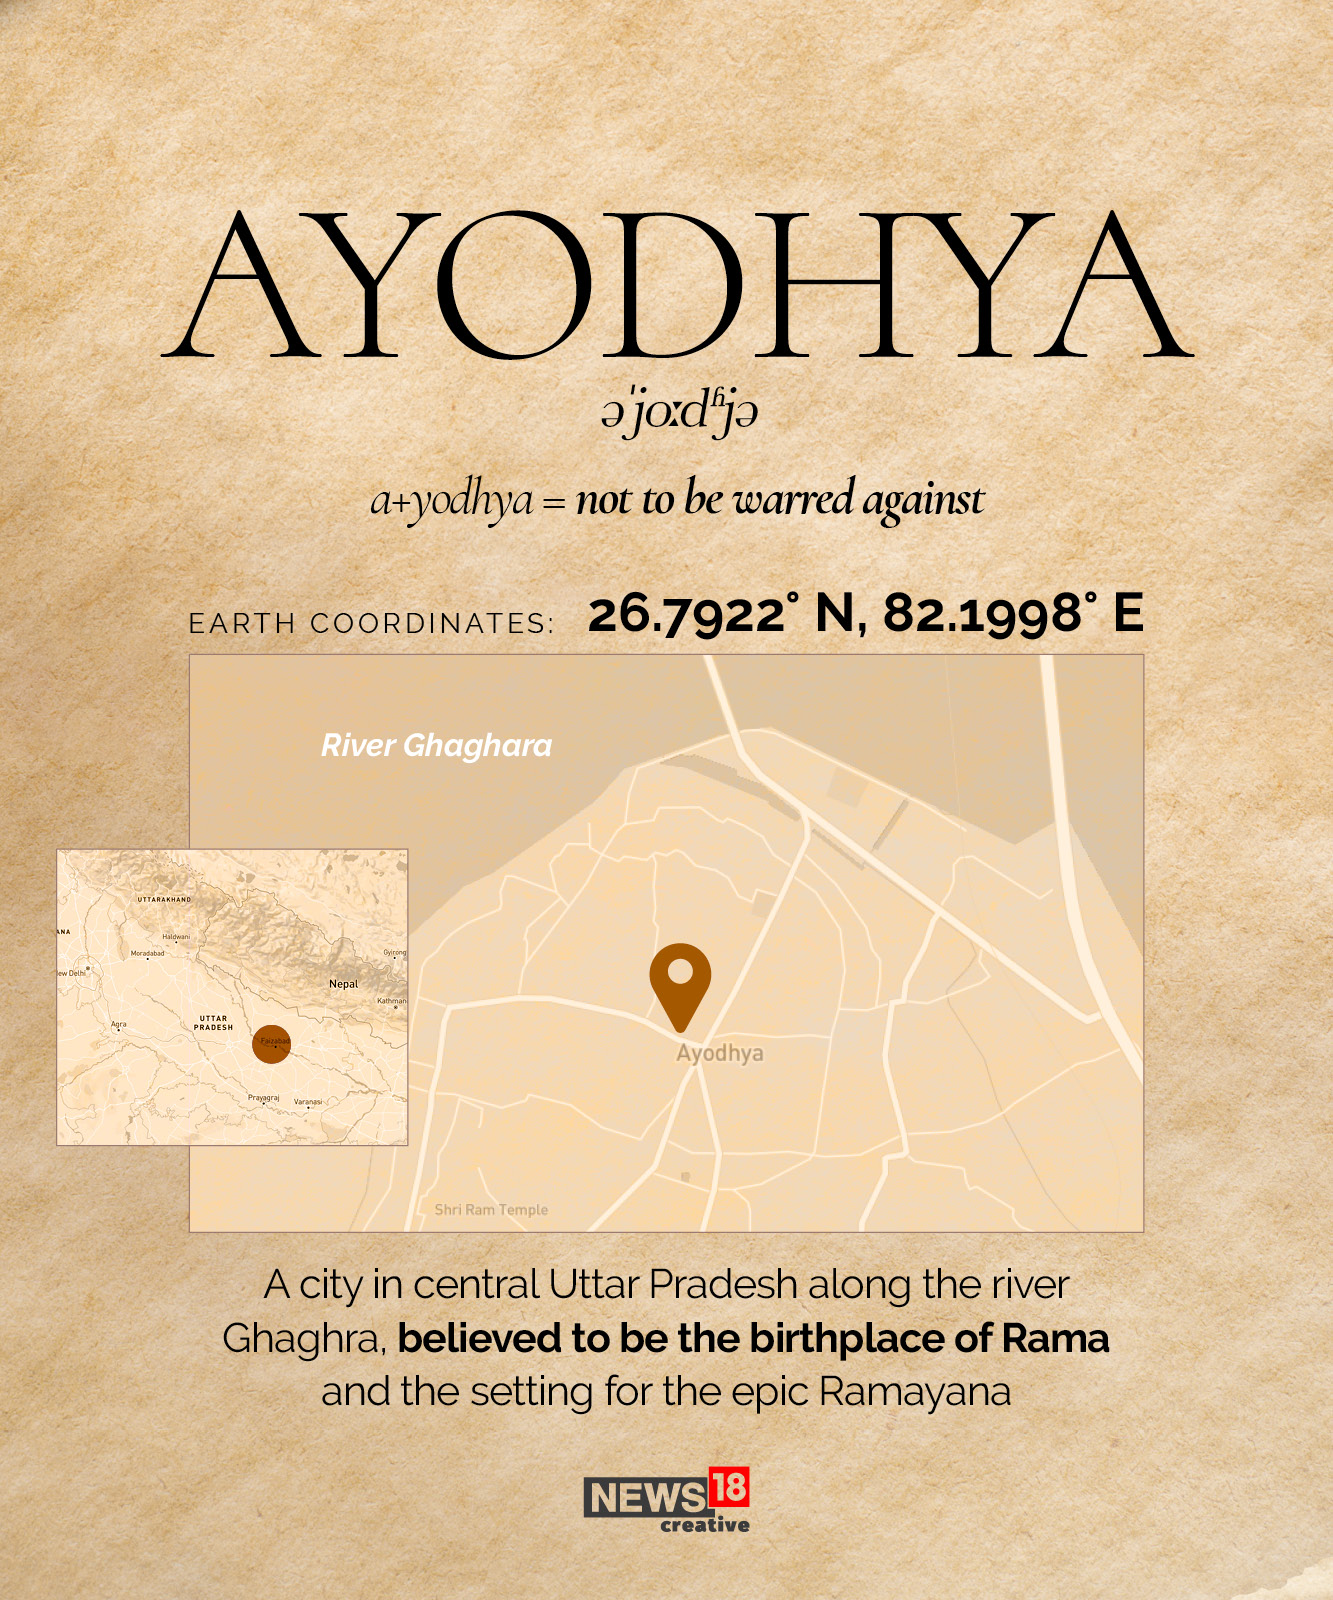 Ayodhya timeline: Twists and turns in the temple town